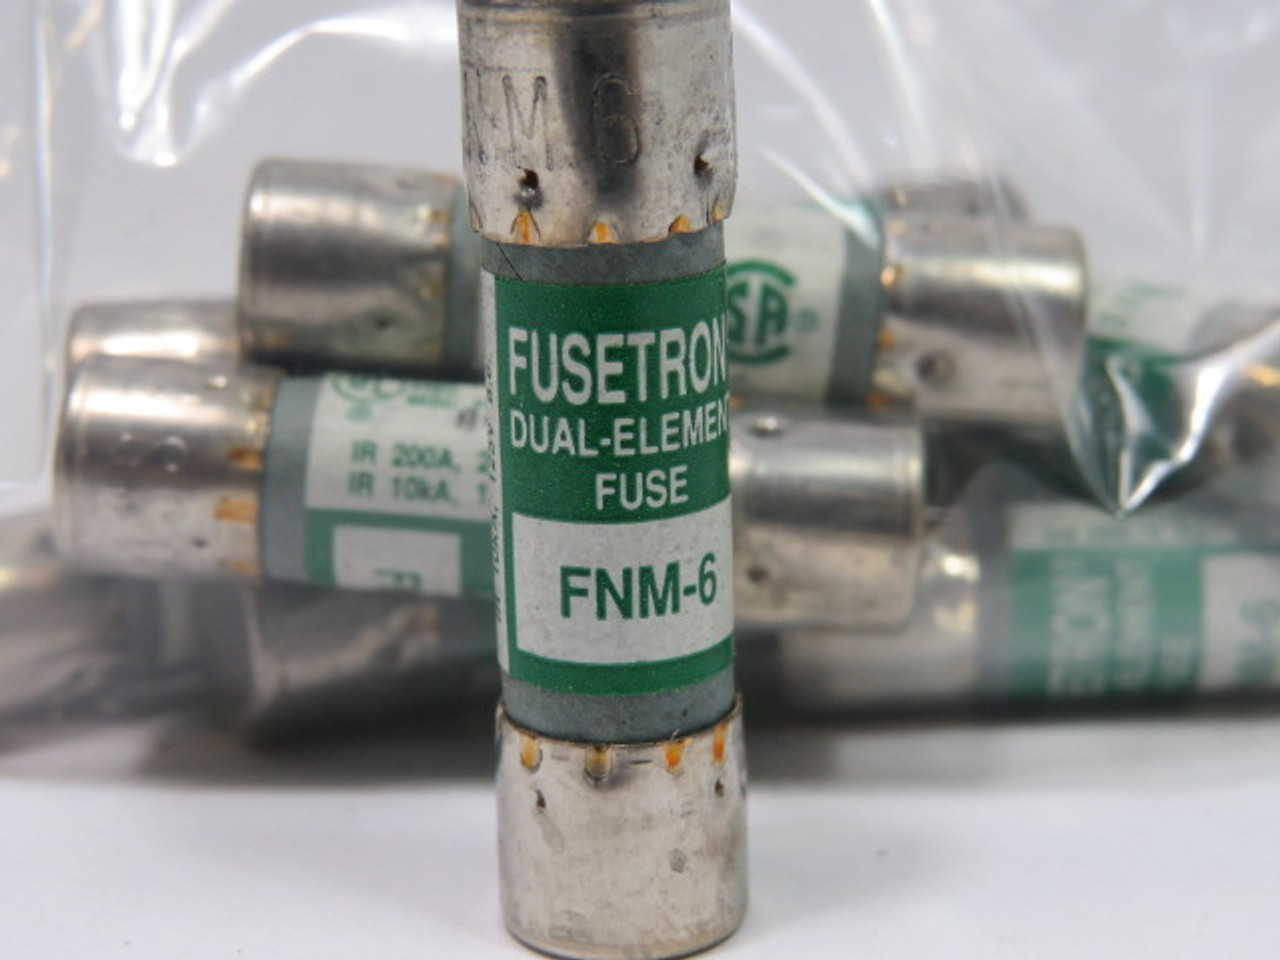 Fusetron FNM-6 Dual Element Fuse 6A 250Vac Lot of 10 USED